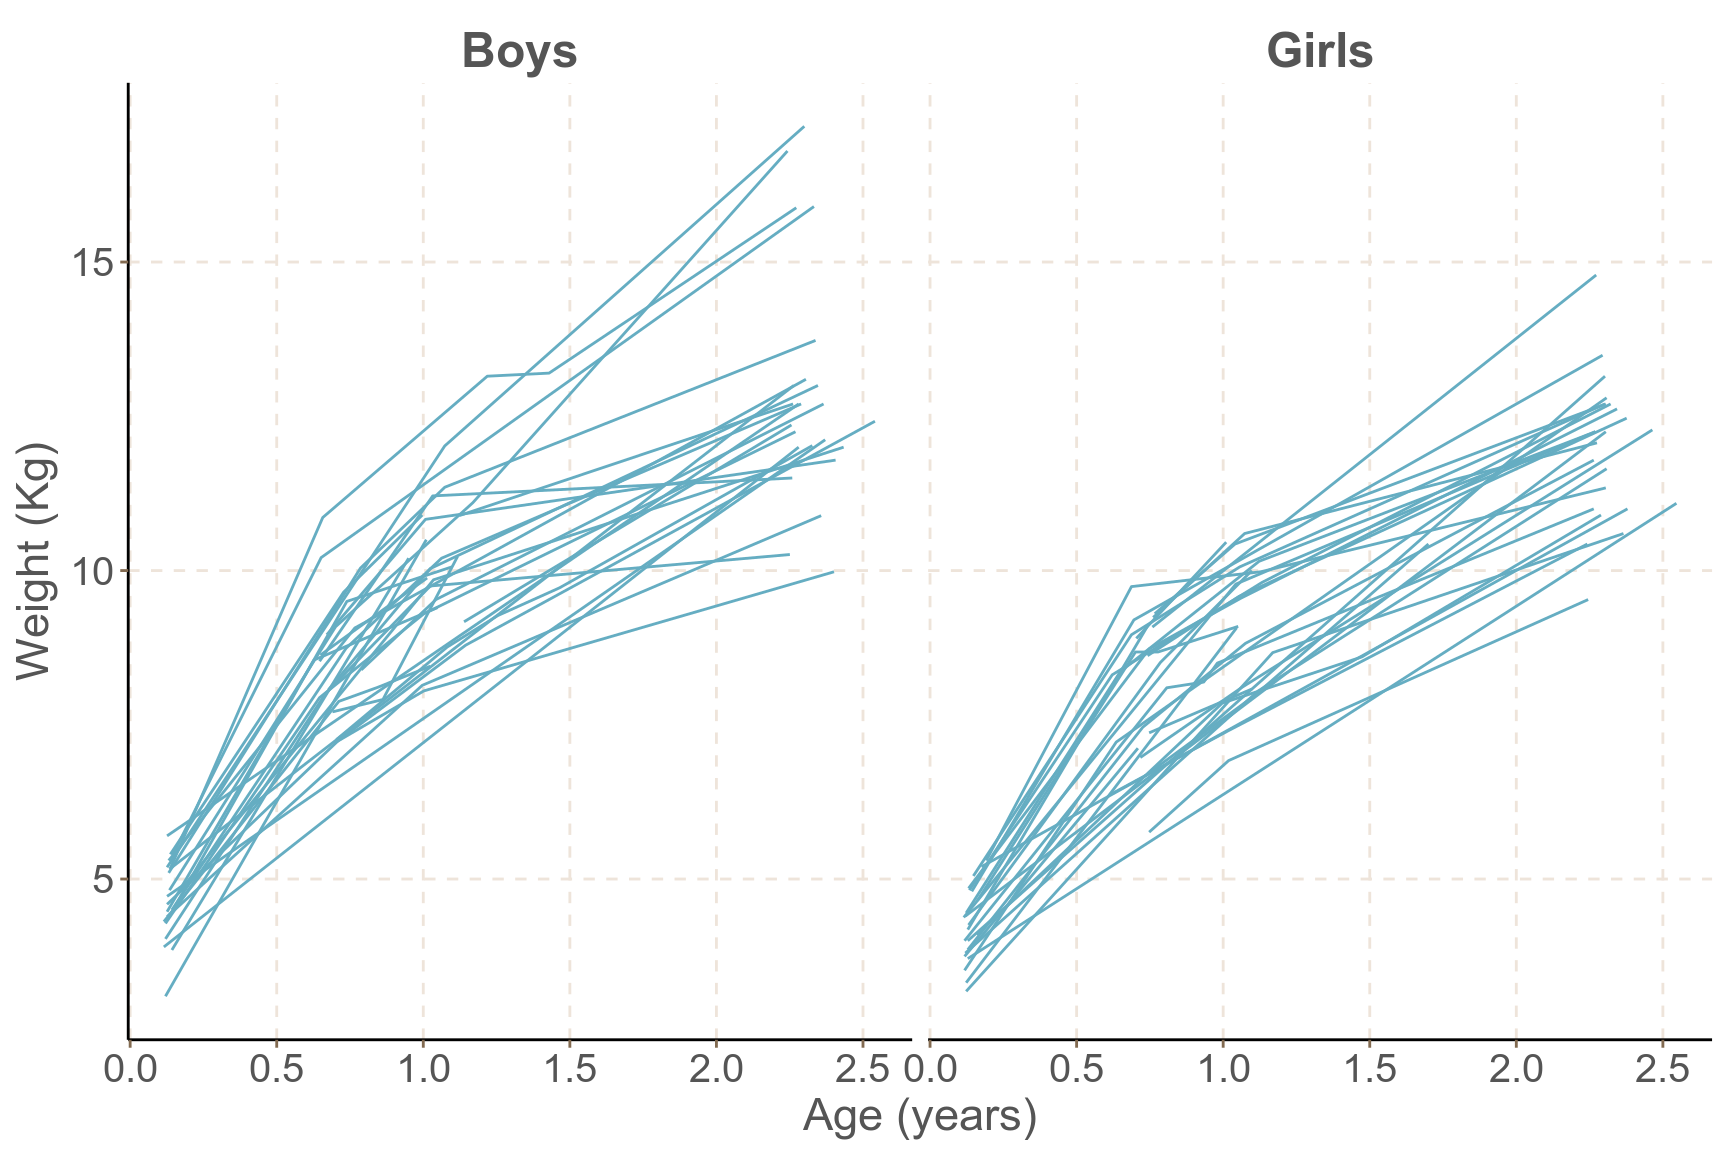 Growth profiles of boys and girls in the Asian growth data